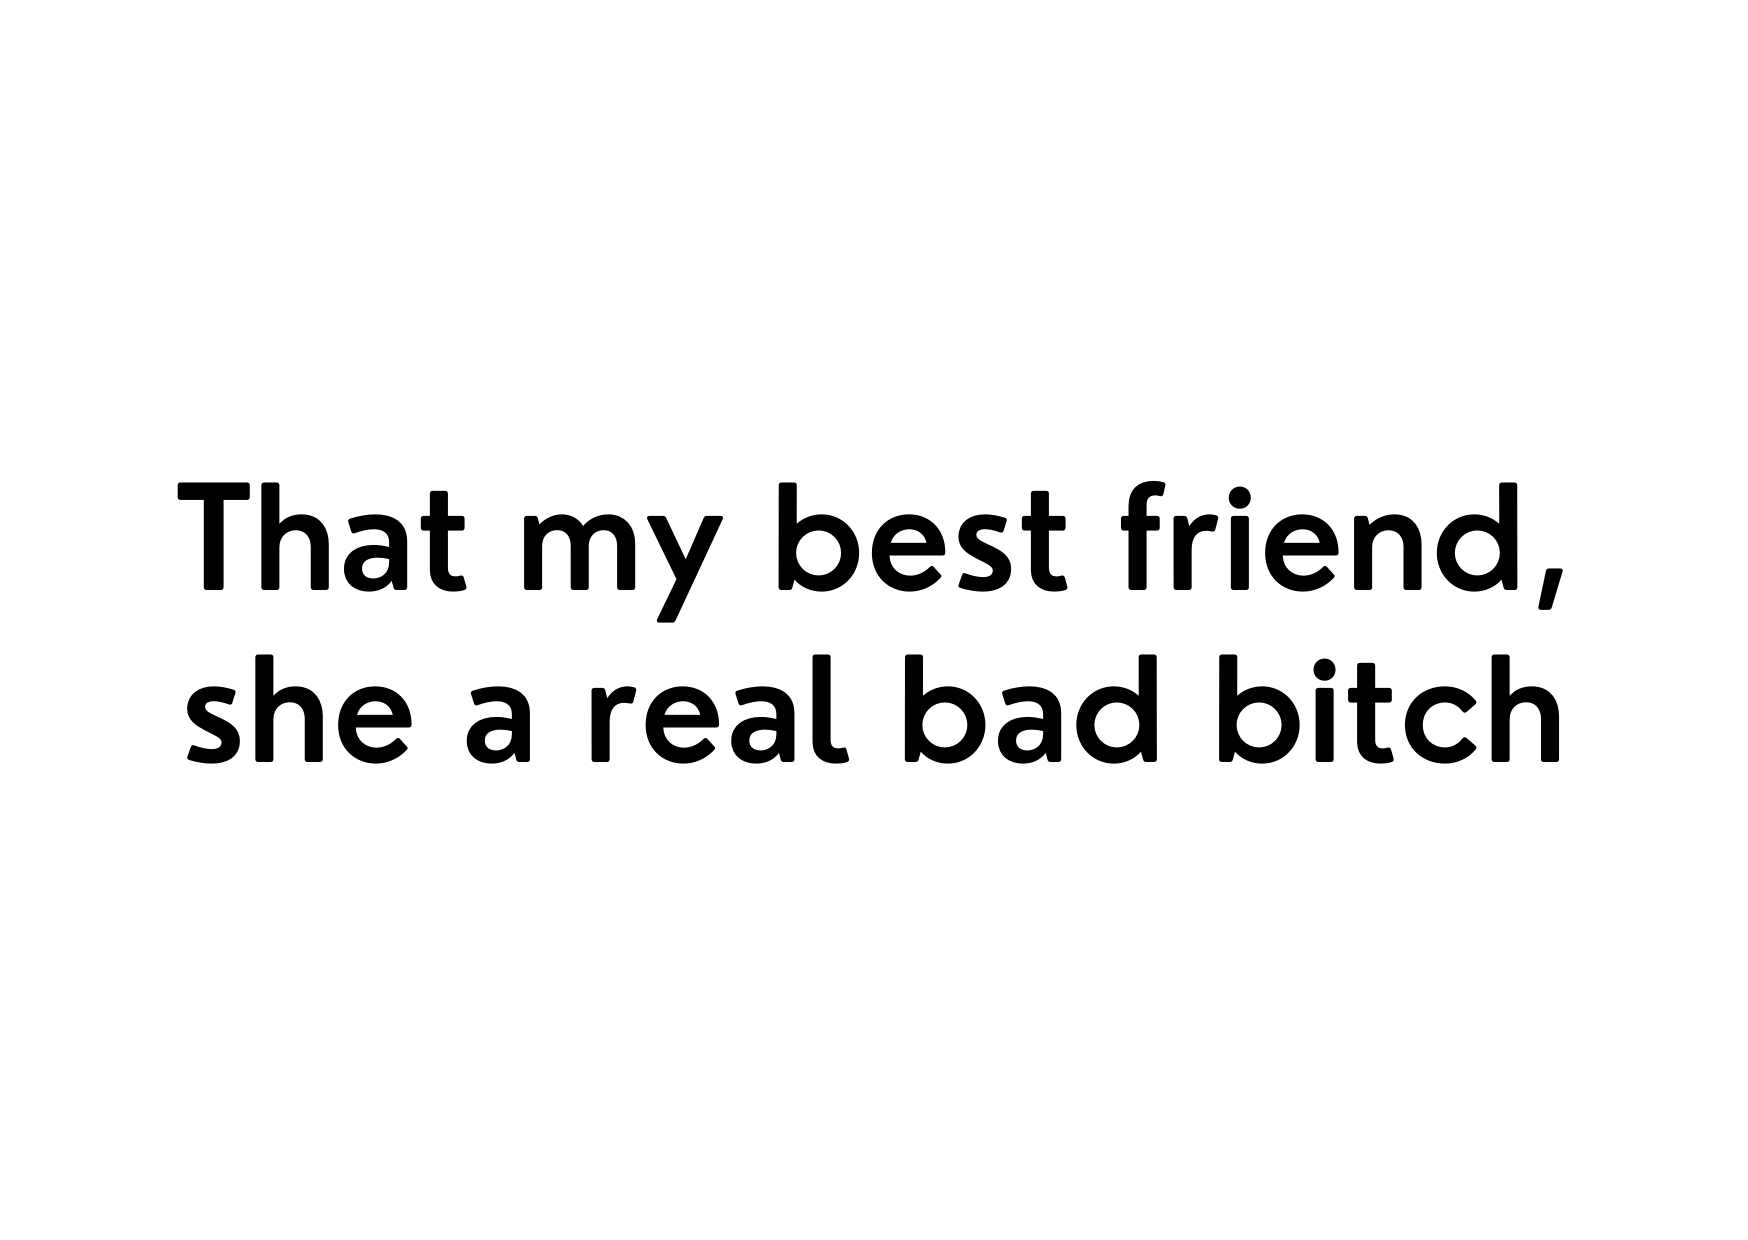 White seed paper greeting card saying "That my best friend, she a real bad bitch"